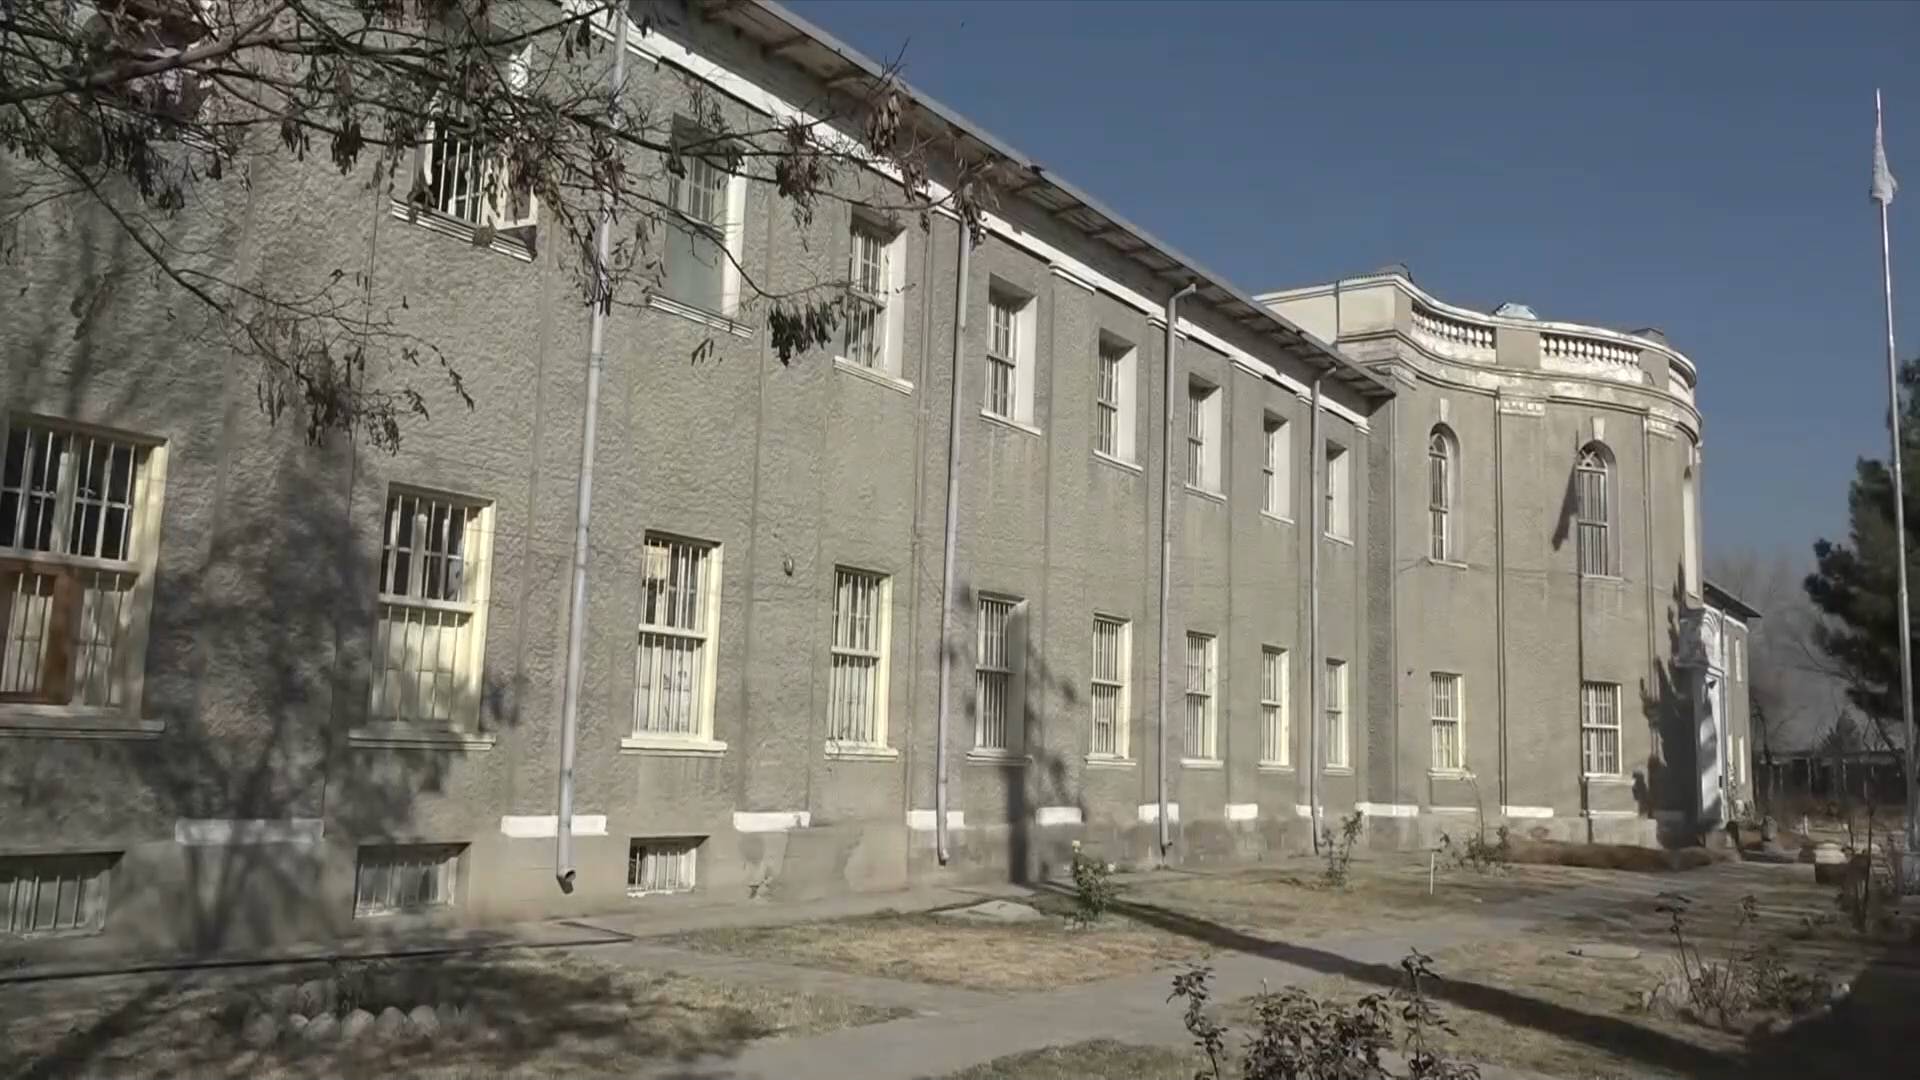 GLOBALink | Afghanistan's national museum reopens for visitors